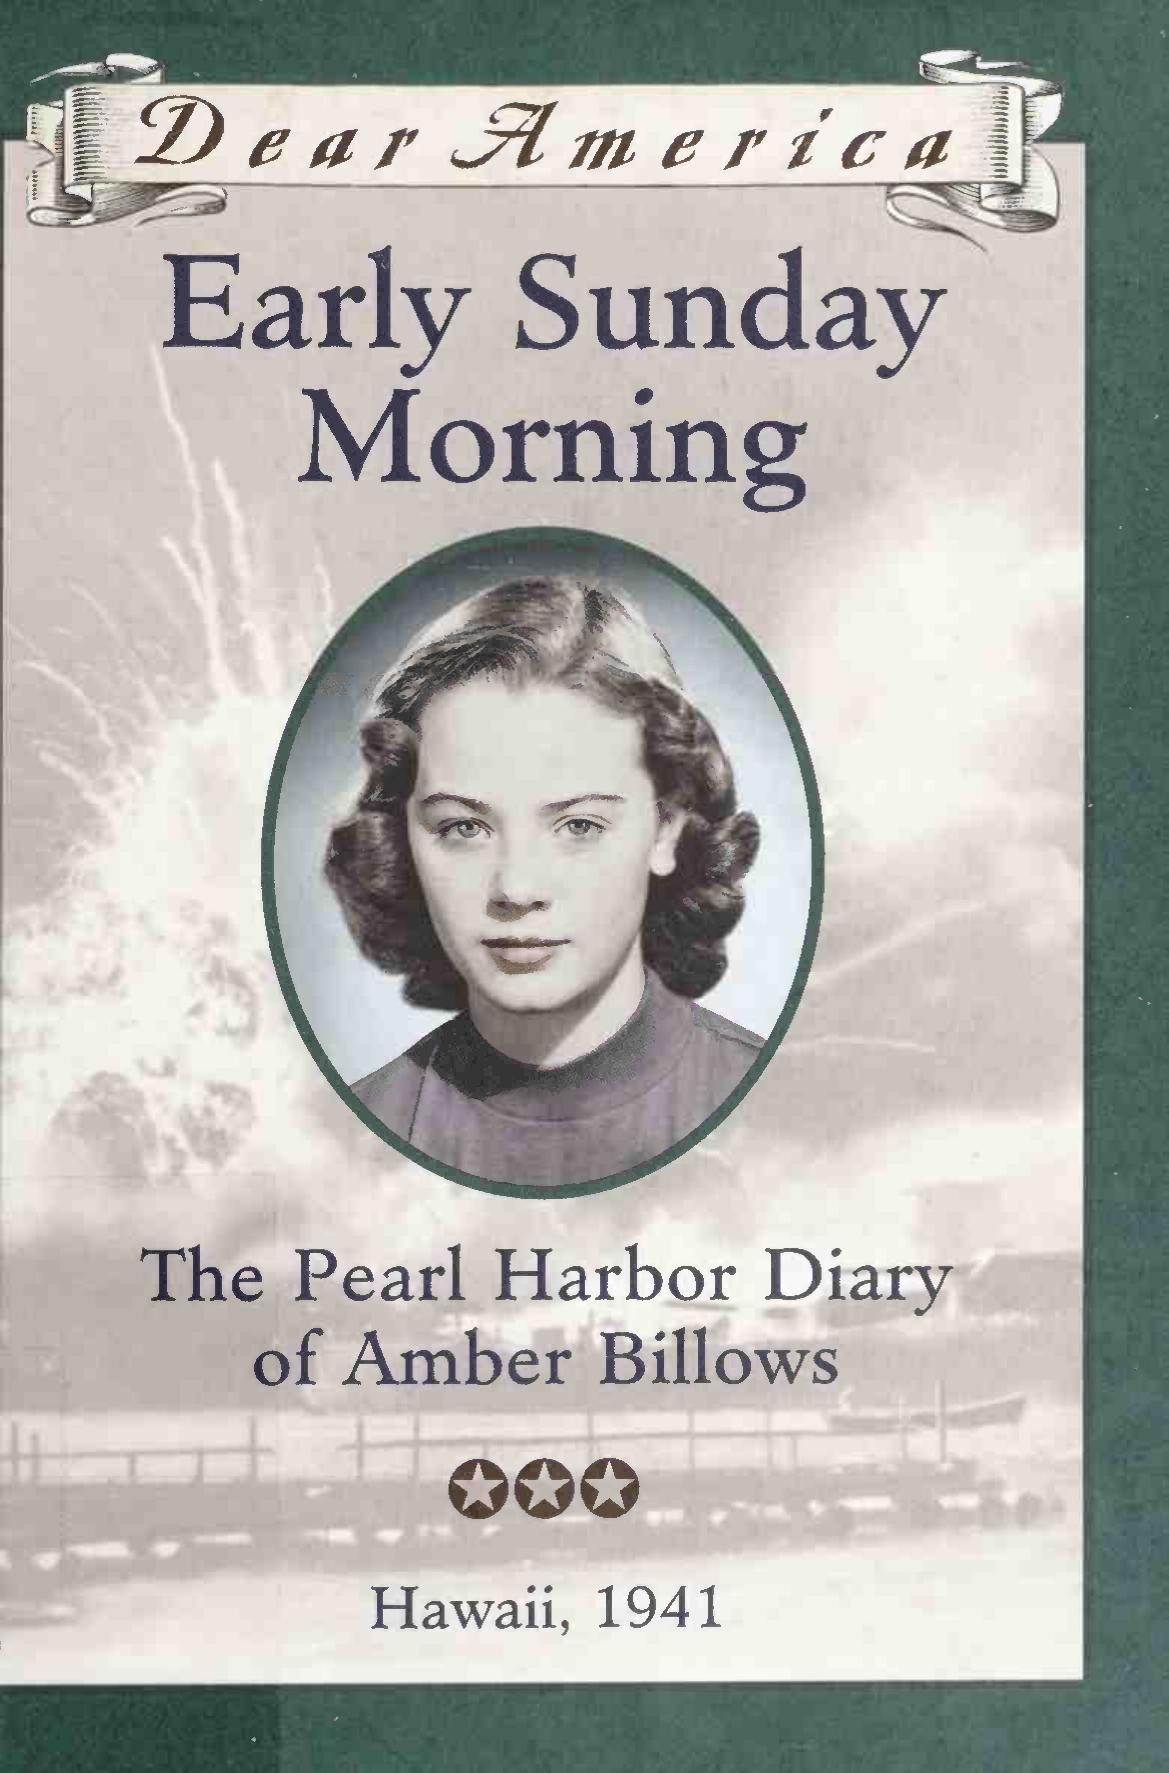 Early Sunday morning : the Pearl Harbor diary of Amber Billows by Denenberg Barry